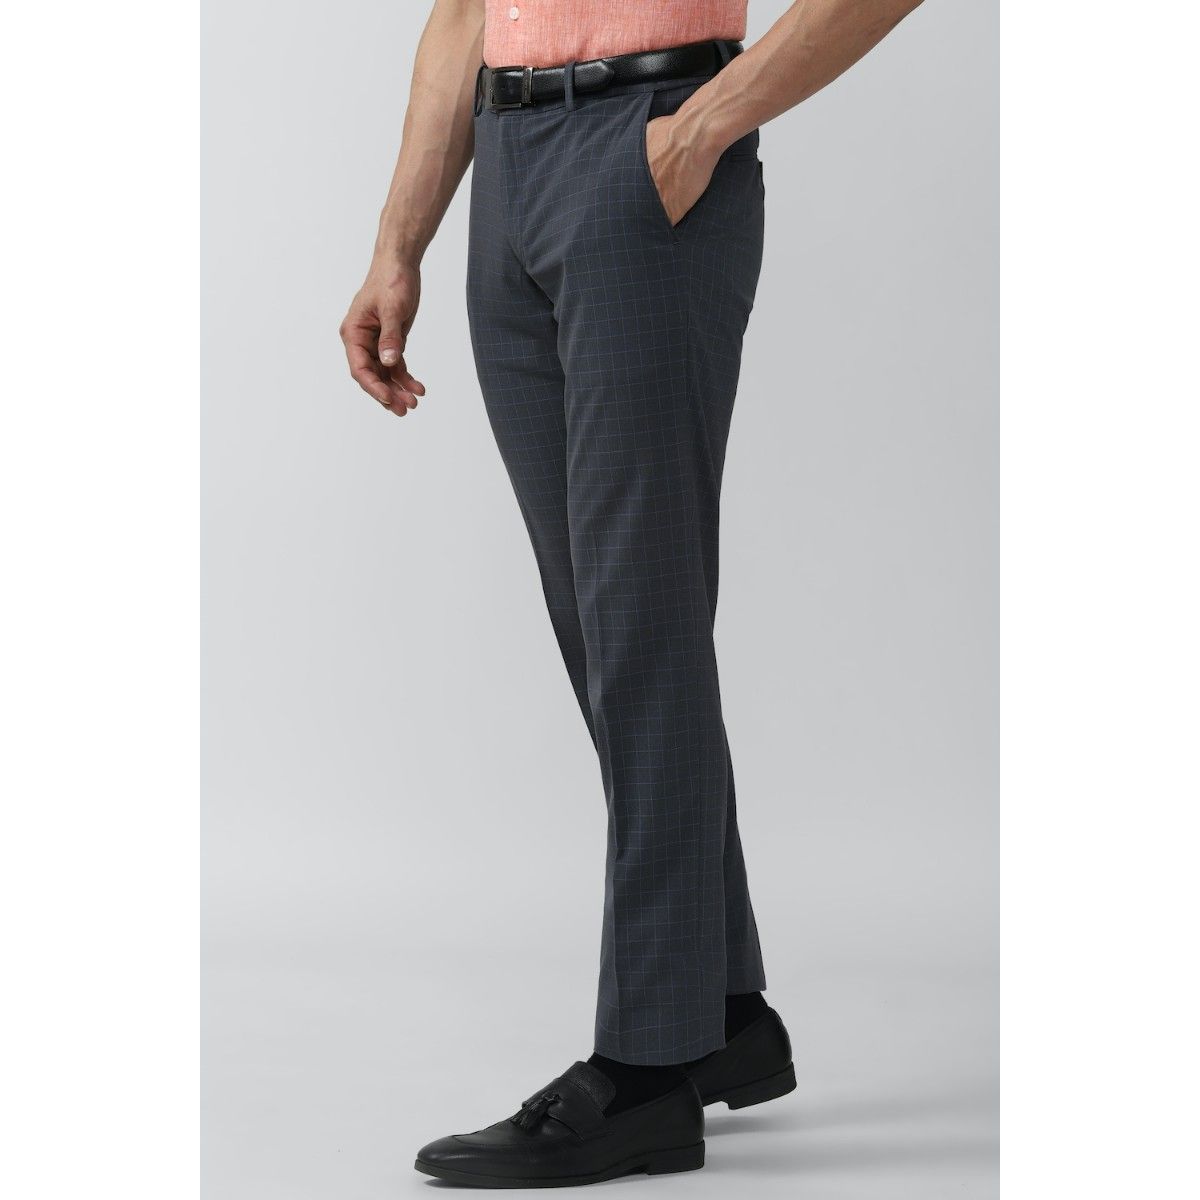 BASICS TAPERED FIT LEAD GREY SATIN STRETCH TROUSERS-22BTR50796